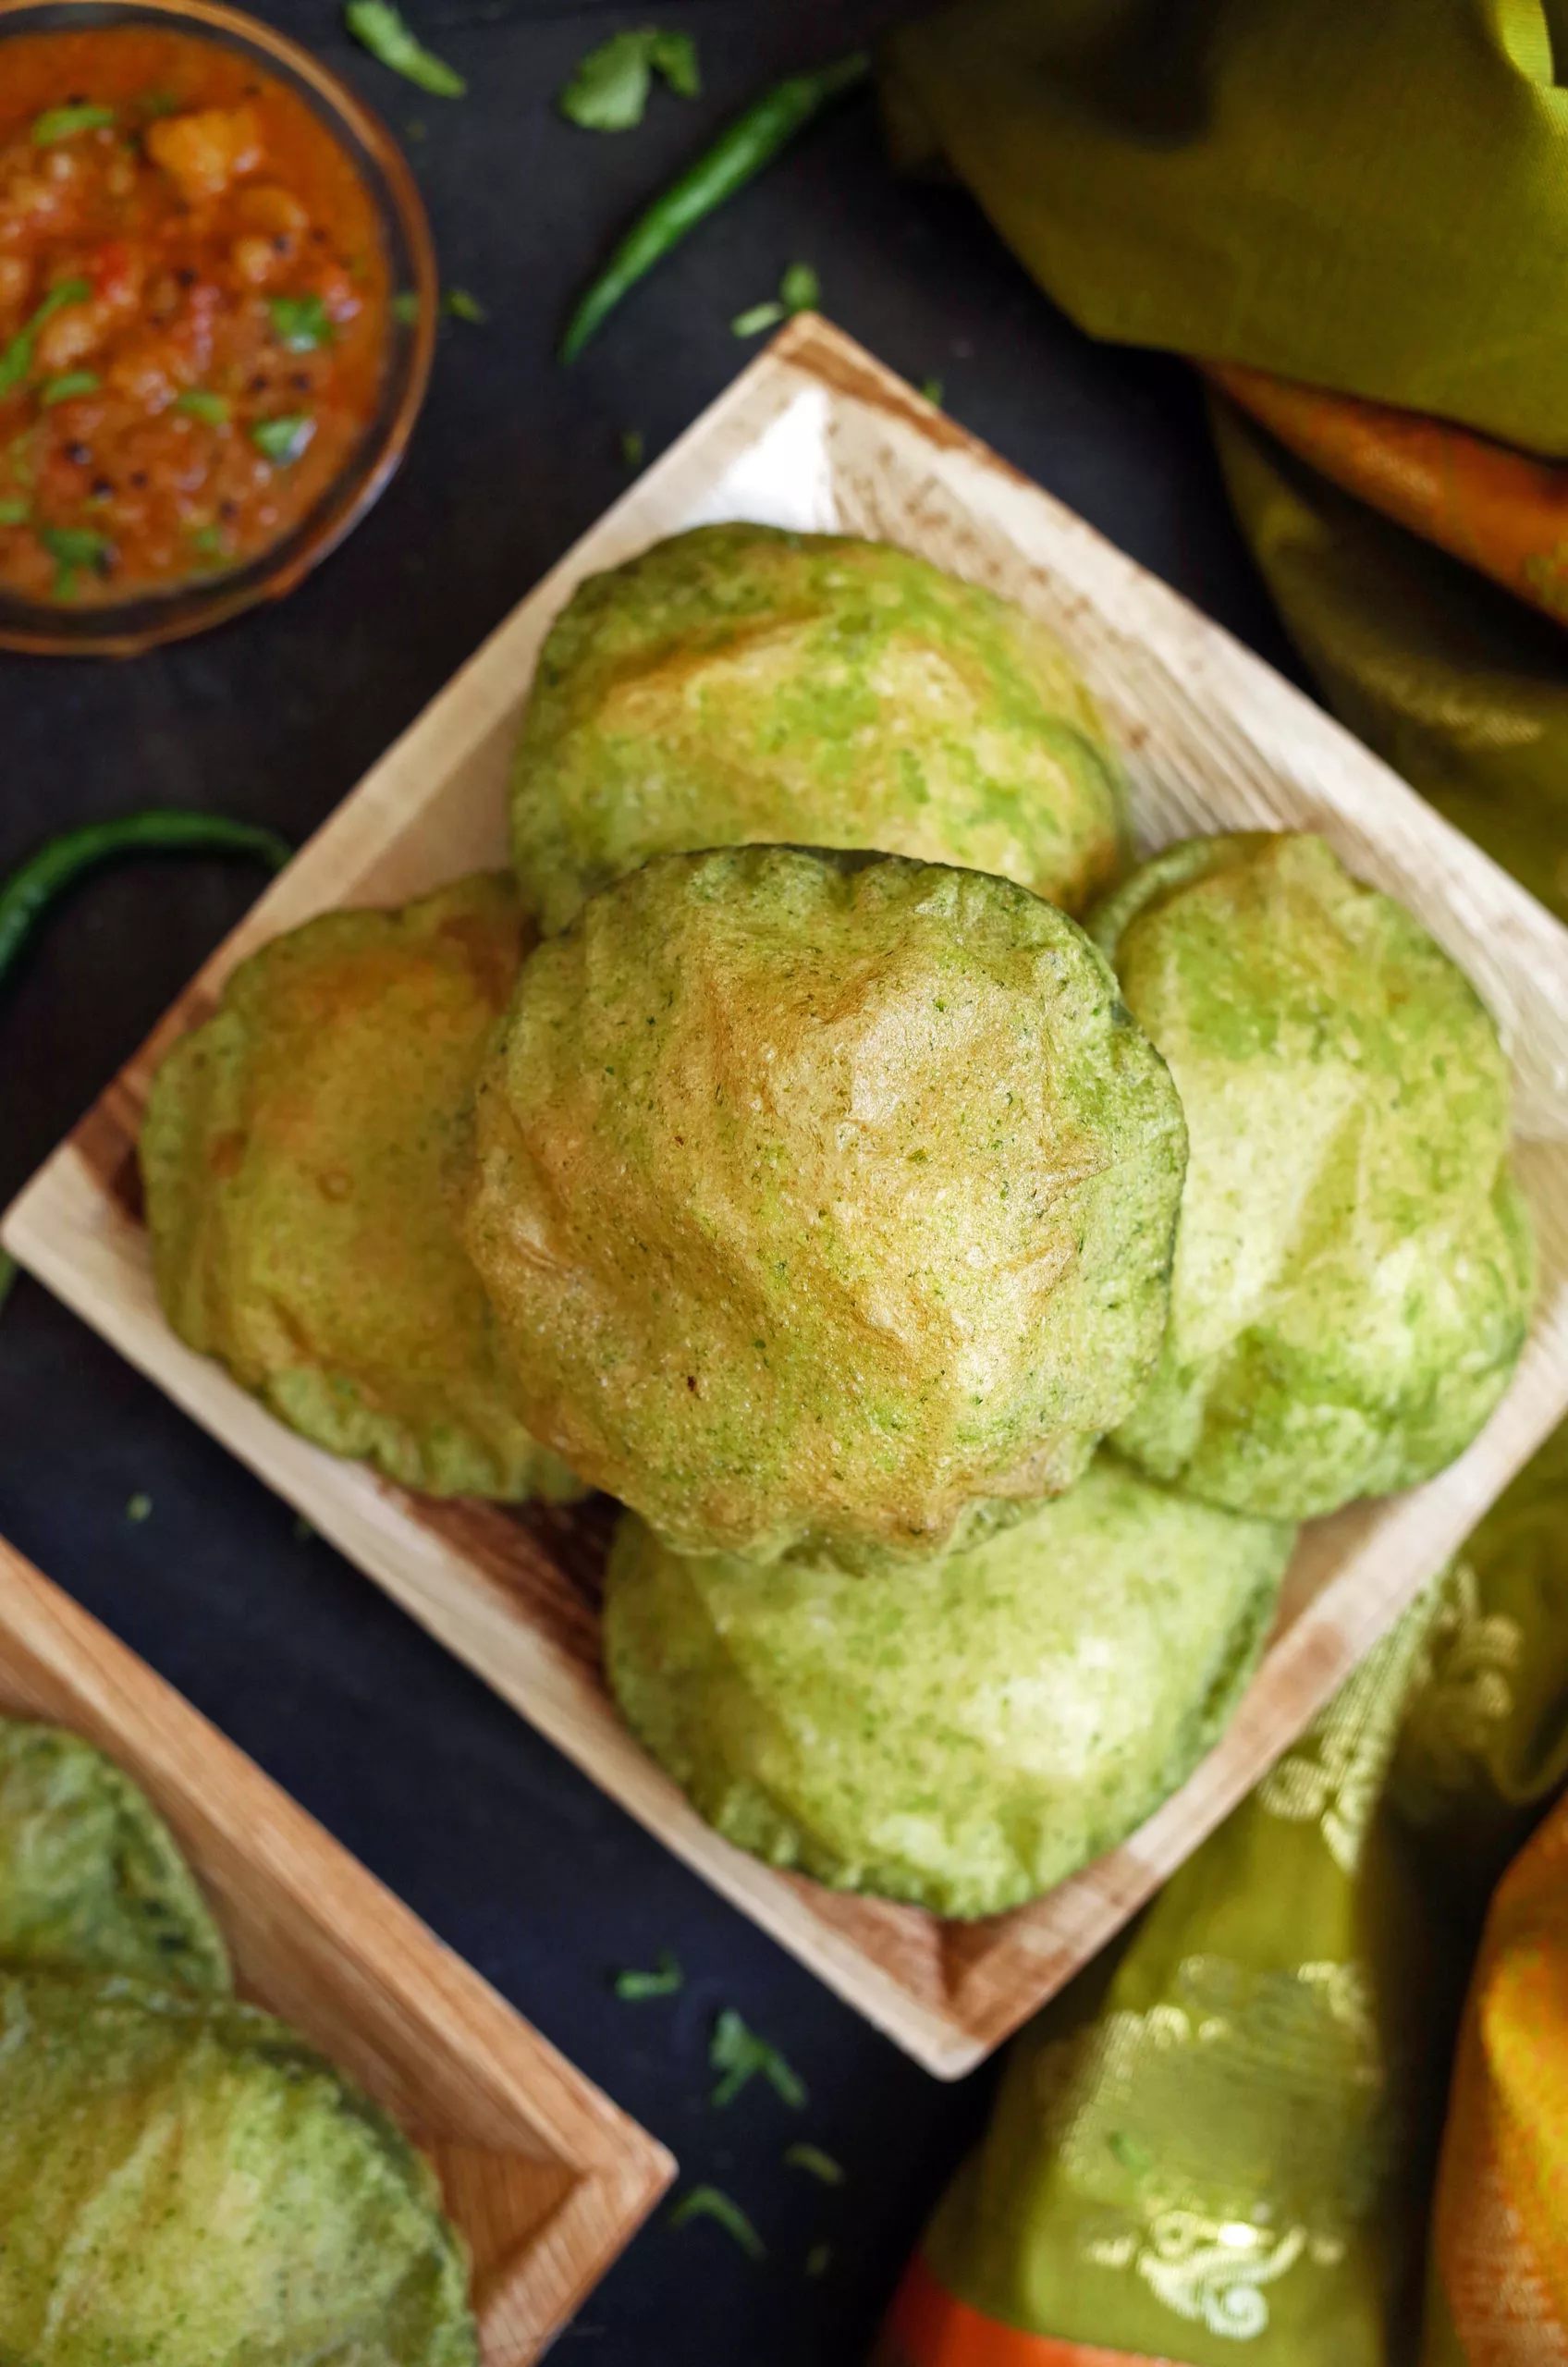 Palak Puri – Puffed Indian Breads with Spinach Dough